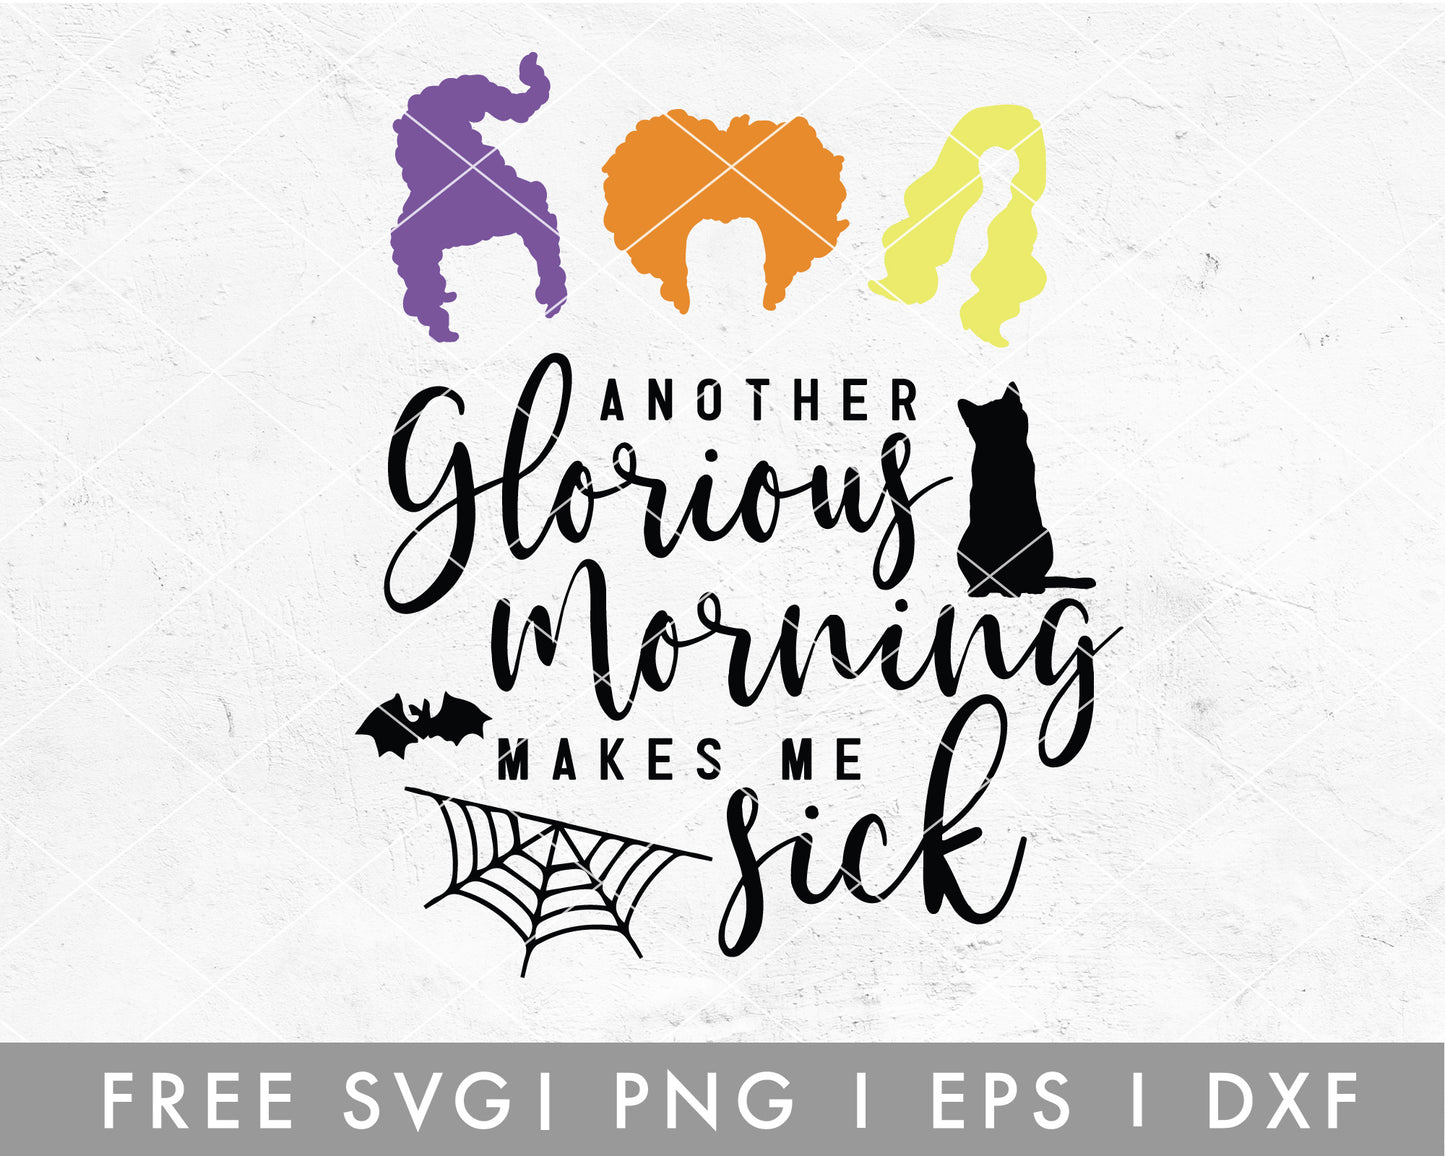 FREE Another Glorious Morning SVG